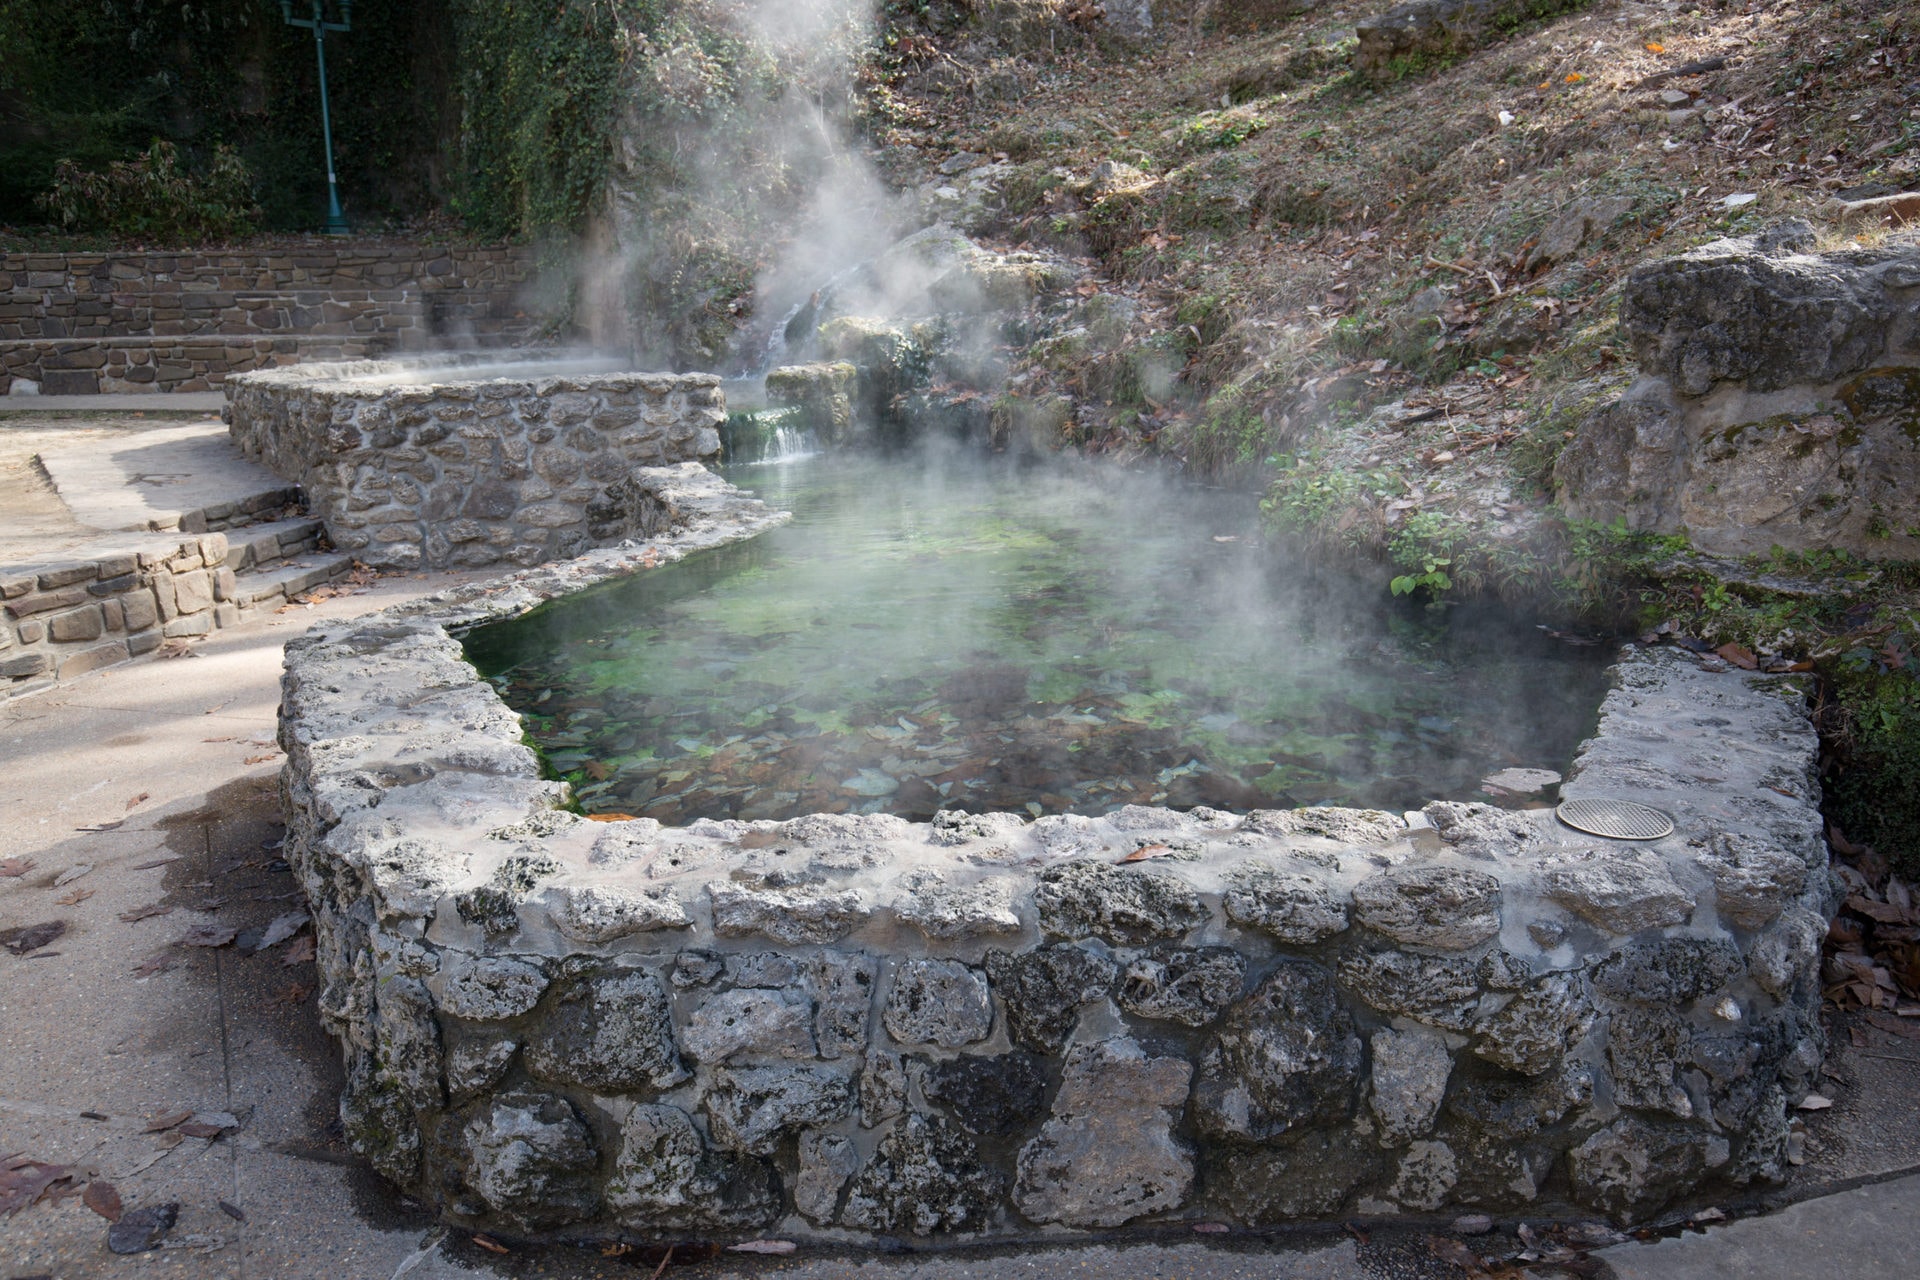 A city within a park: Arkansas' Hot Springs National Park turns